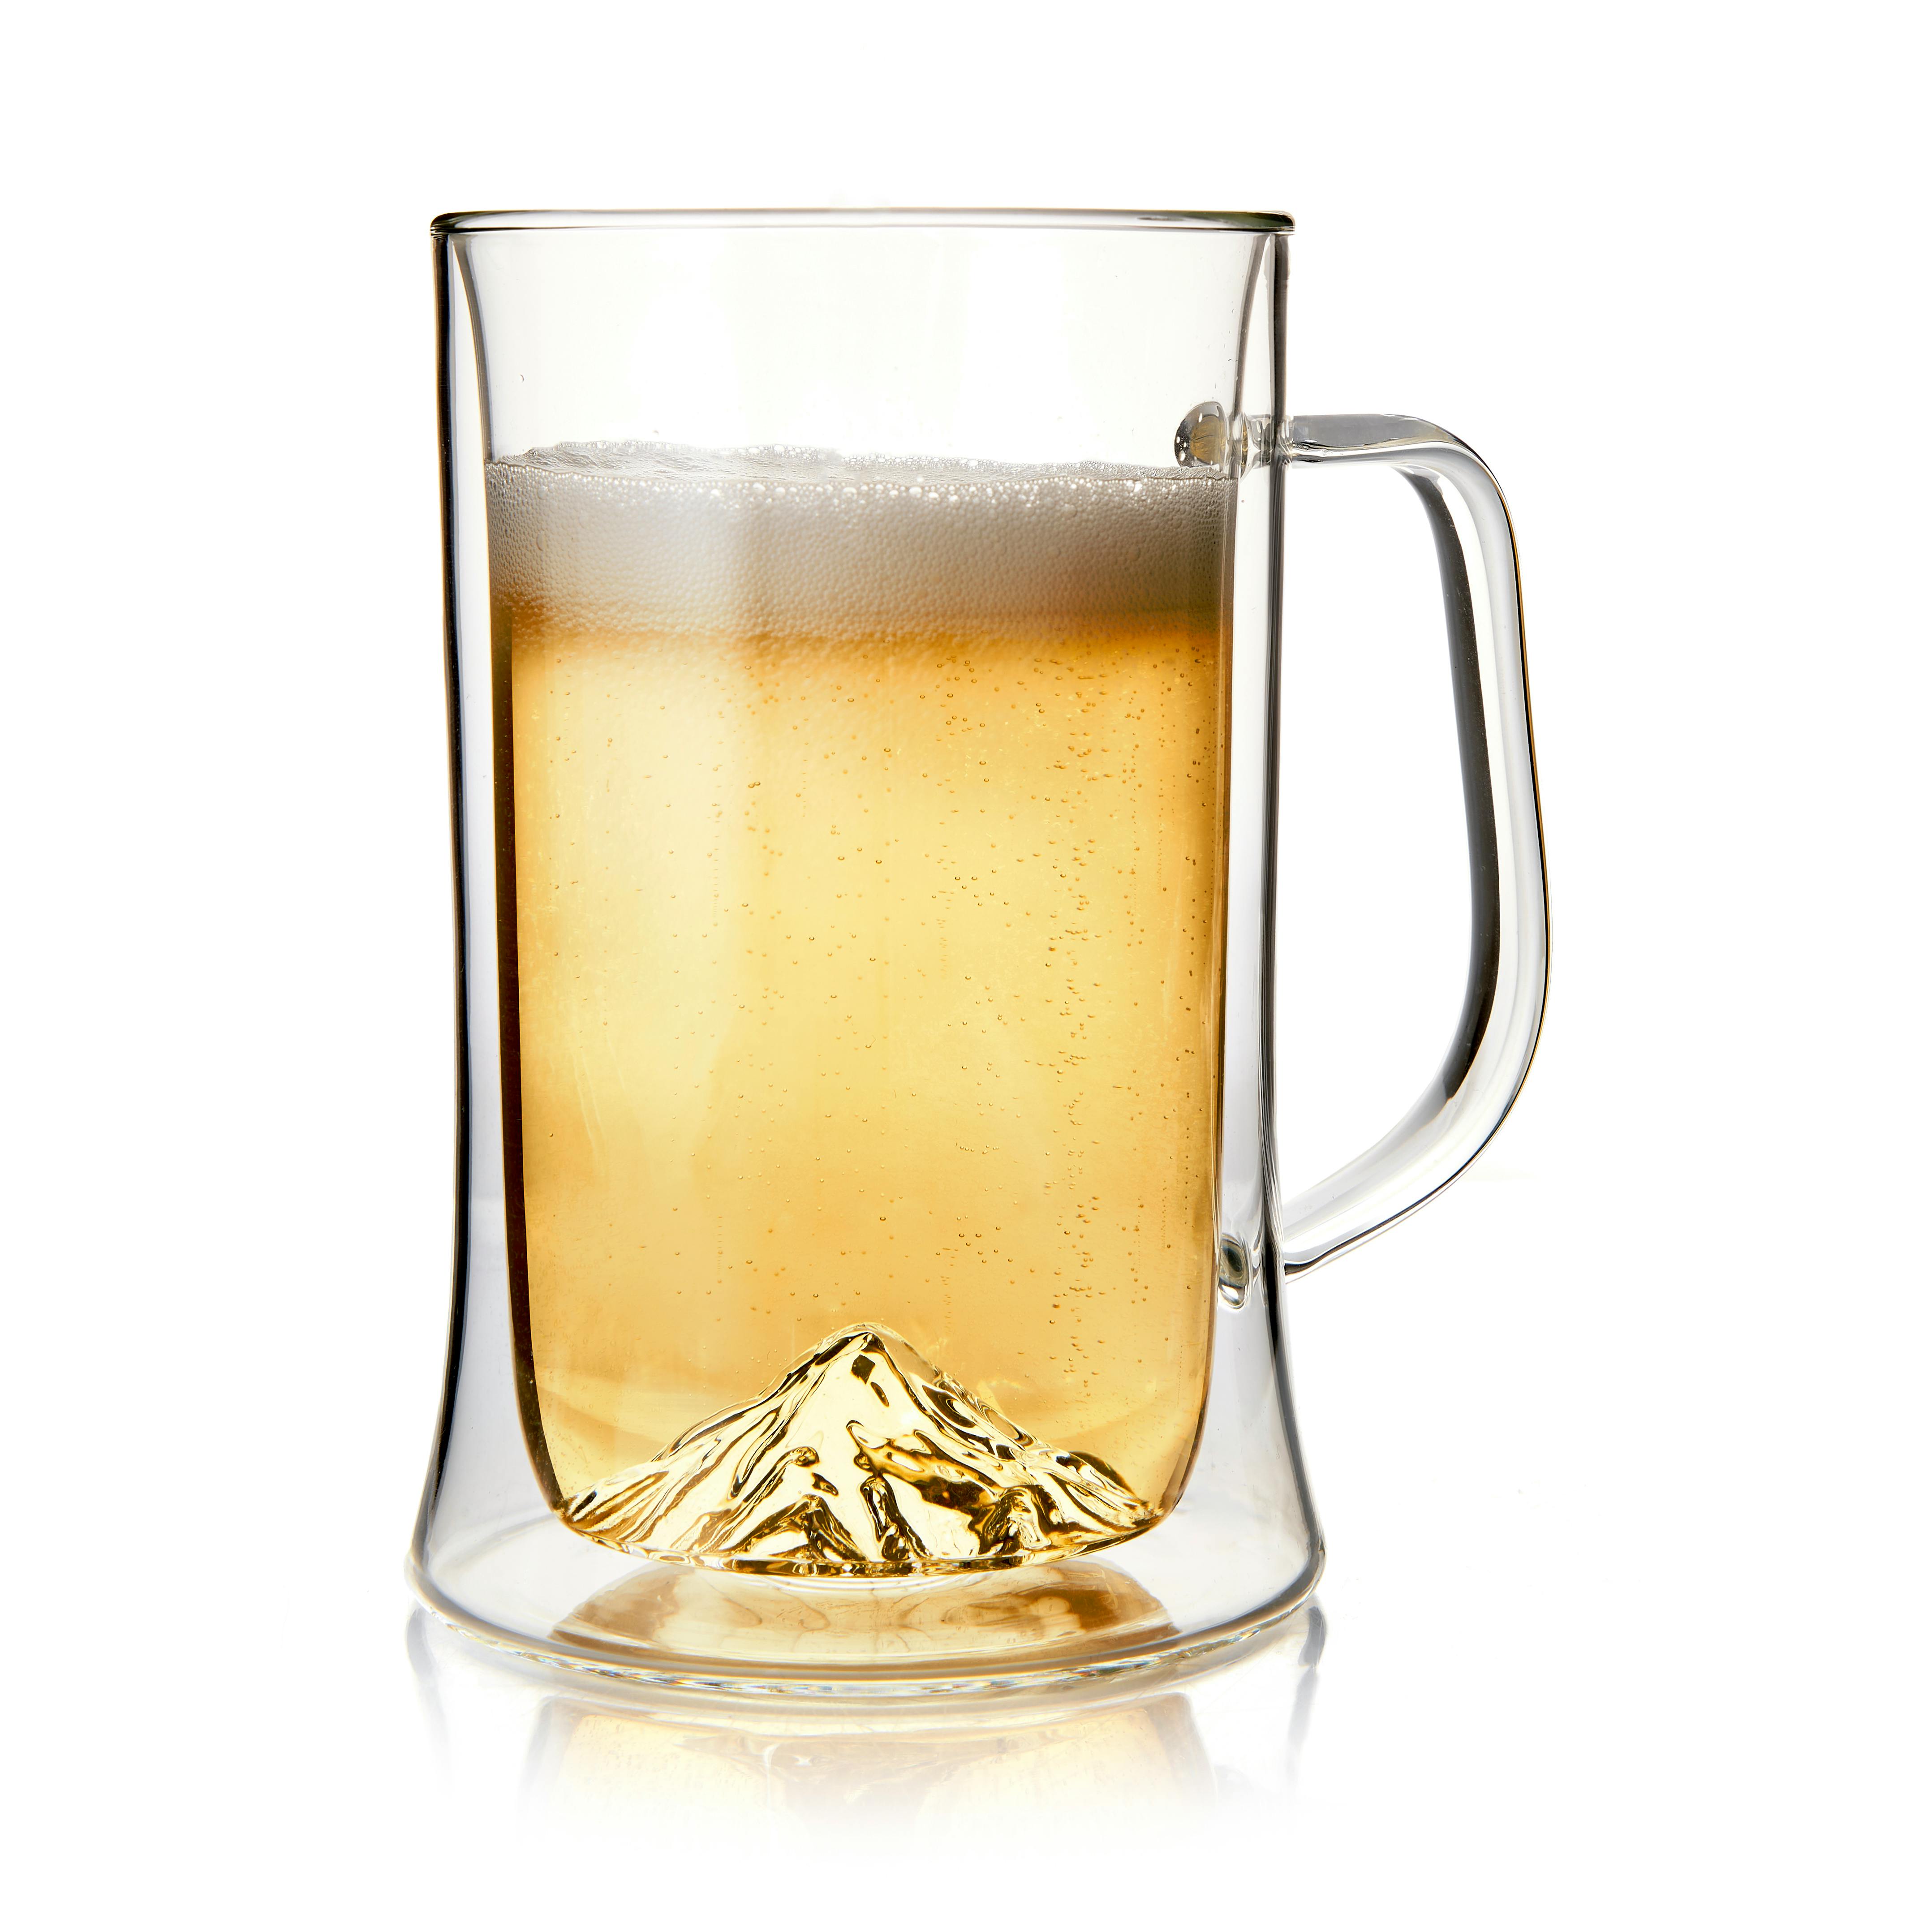 https://huckberry.imgix.net/spree/products/654649/original/72110_Whiskey_Peaks_Double_Wall_Beer_Stein_Clear_01.jpg?auto=format%2C%20compress&crop=top&fit=clip&cs=tinysrgb&ixlib=react-9.5.2